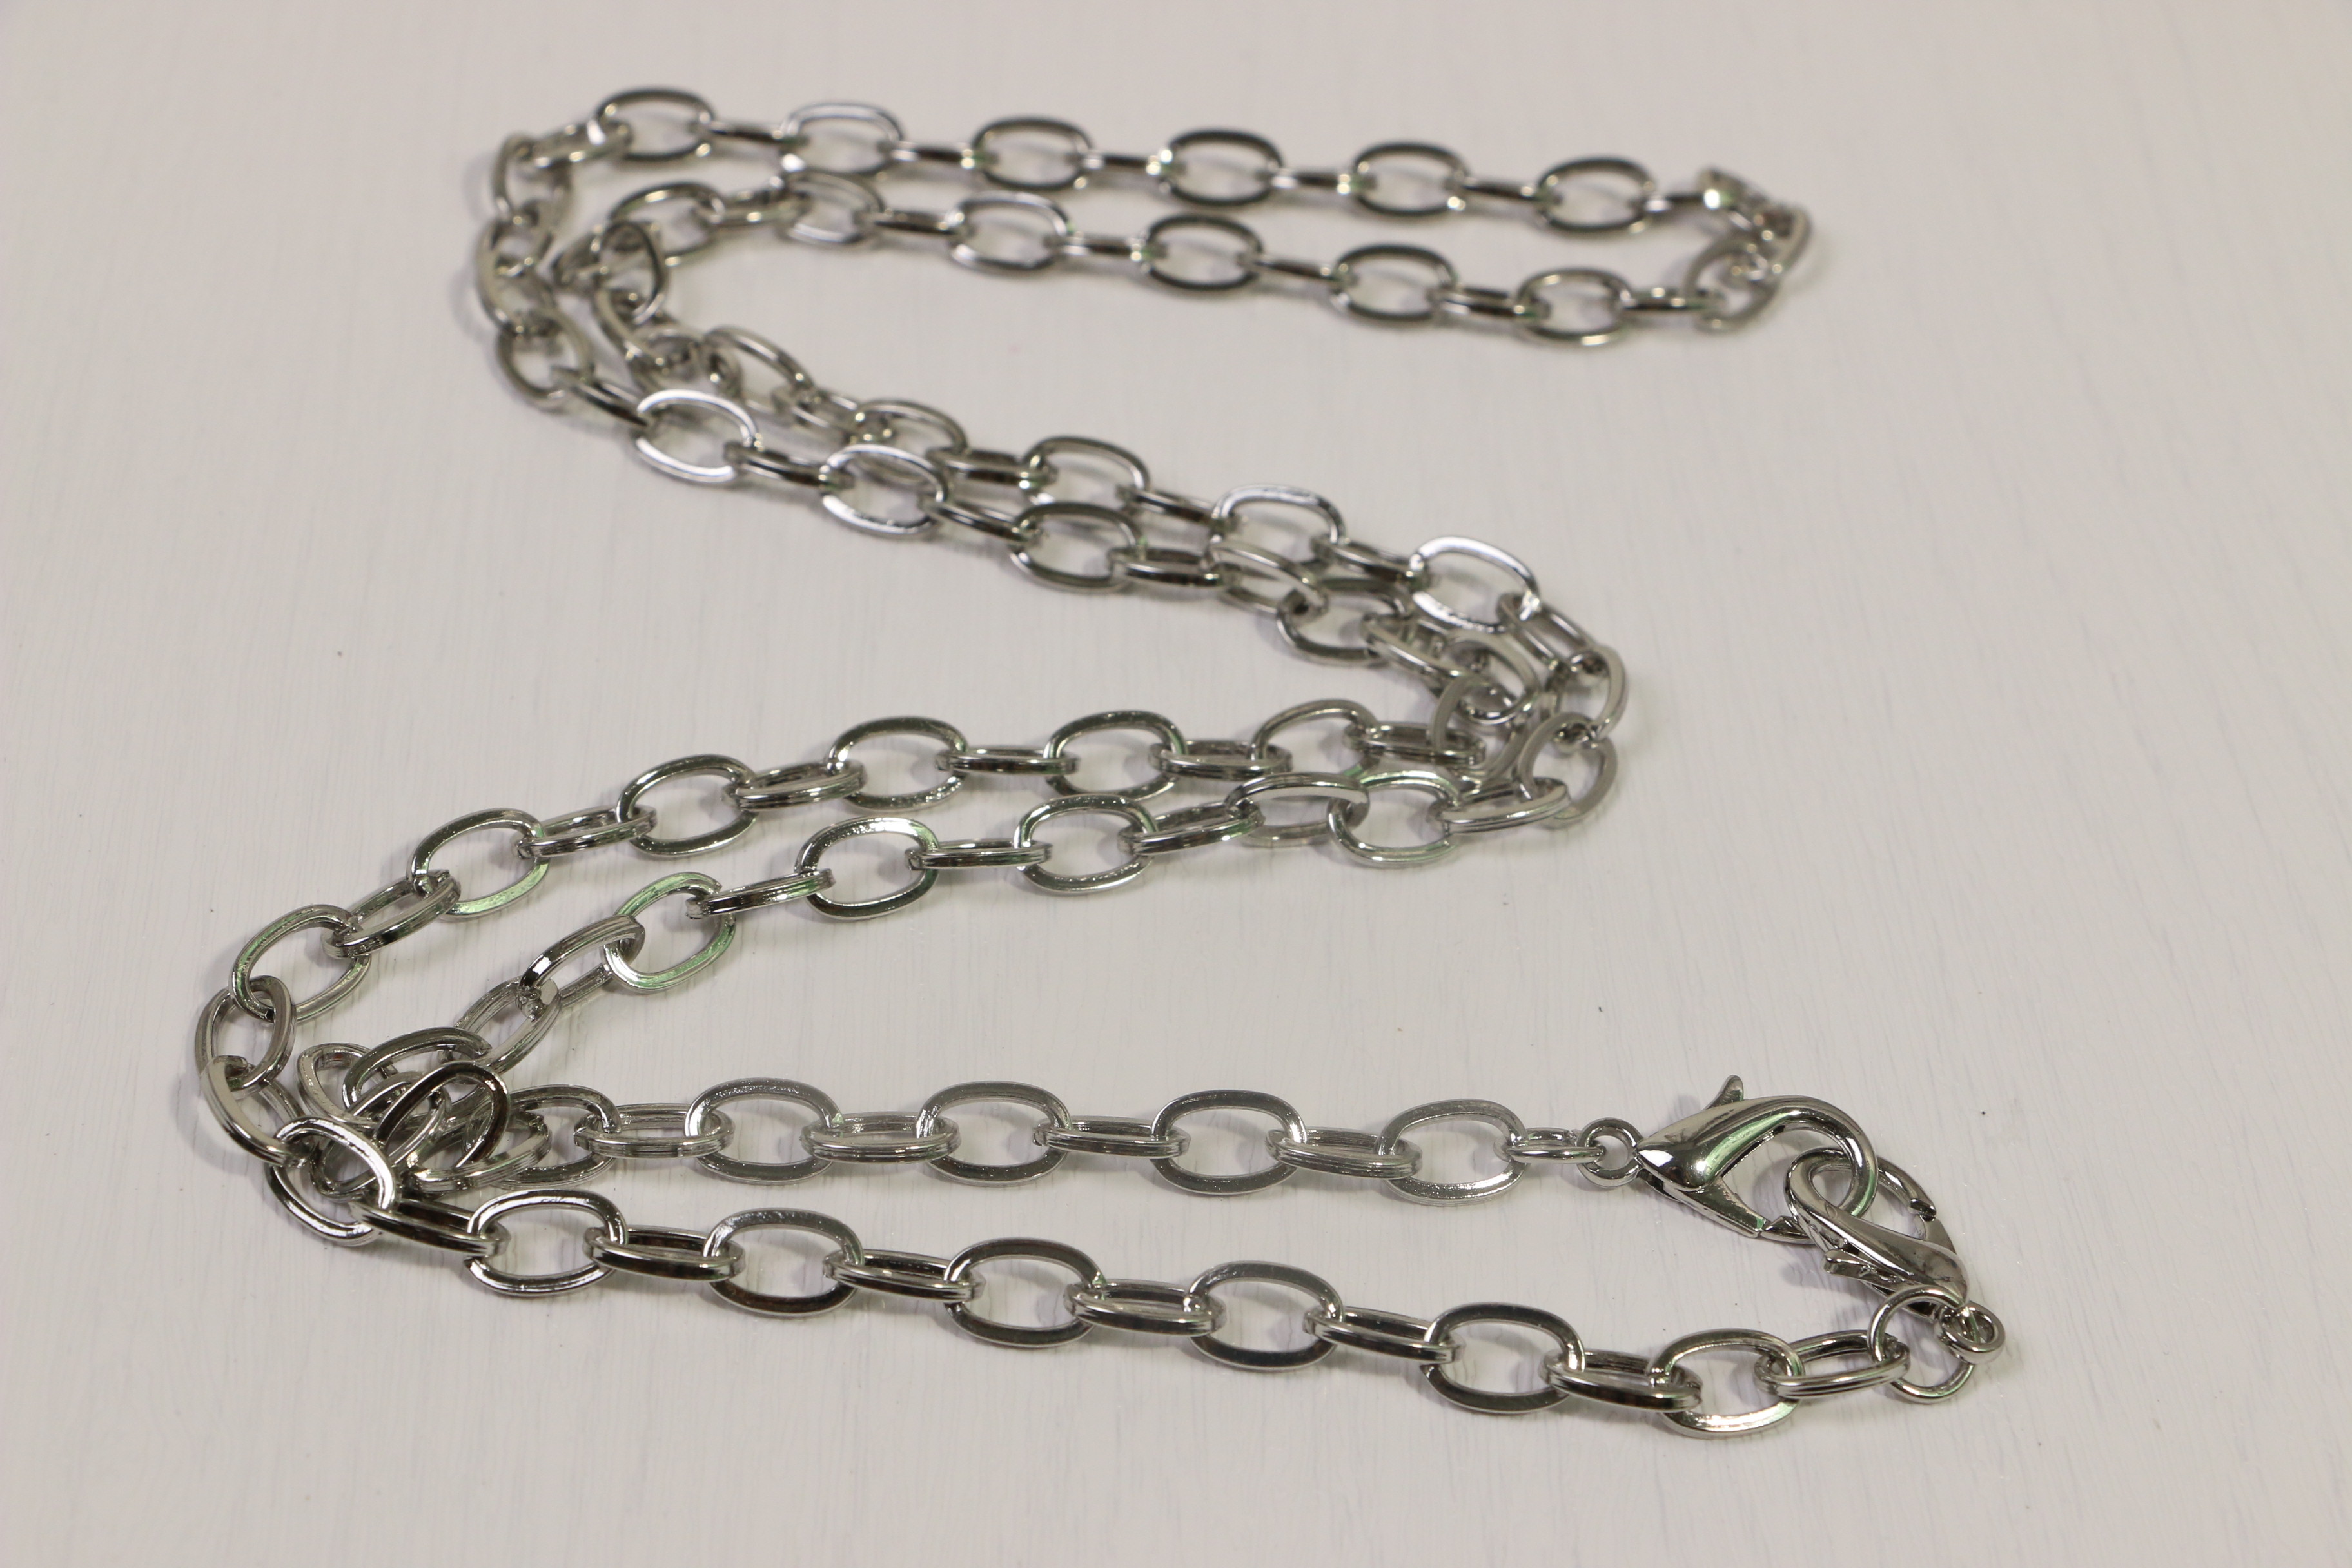  ODM Persistent Metal Handbag Chains , Solid 925 Silver Chain With Zero Lead Manufactures